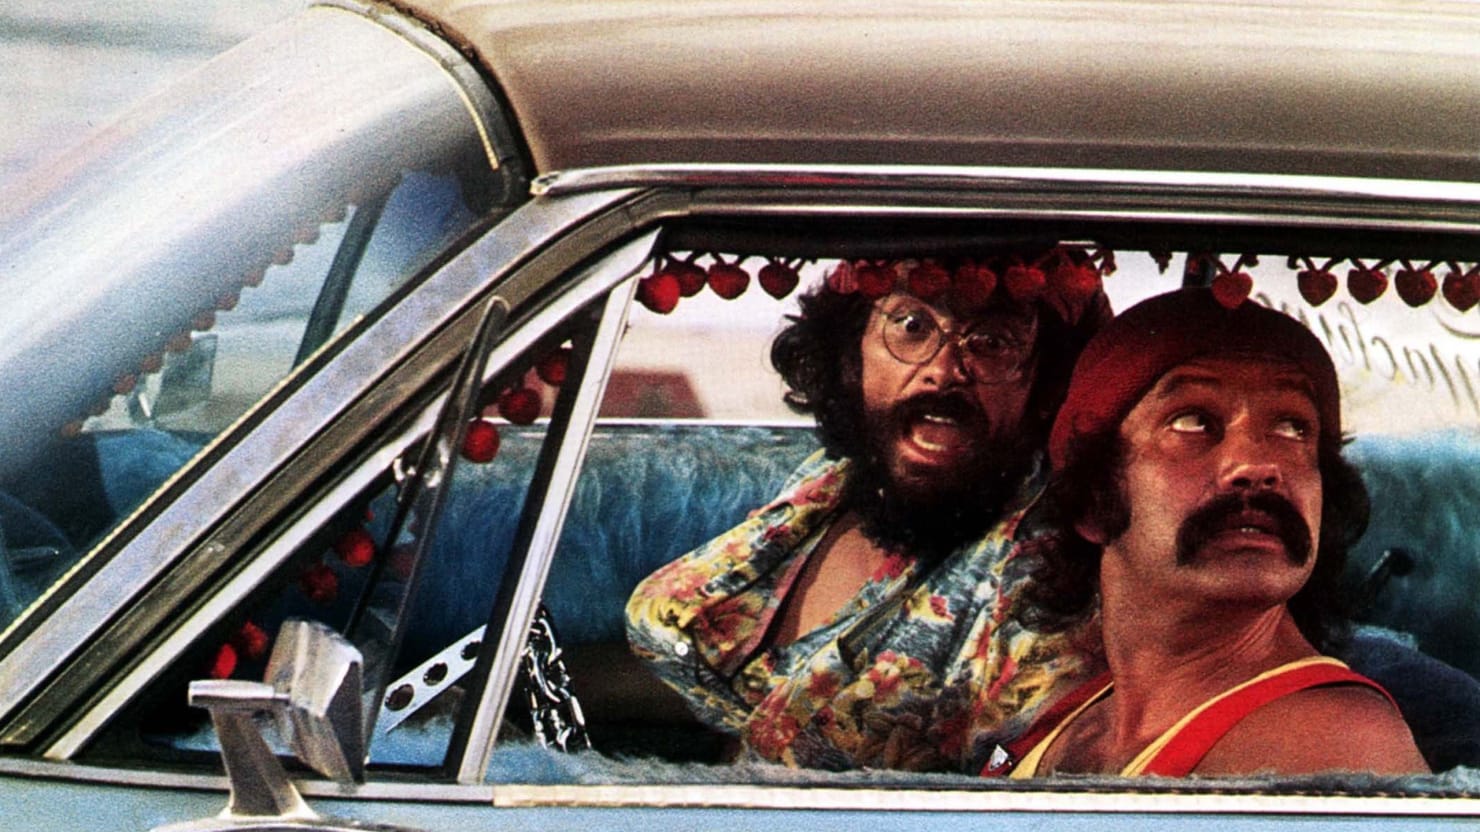 The Truth About Driving While Stoned